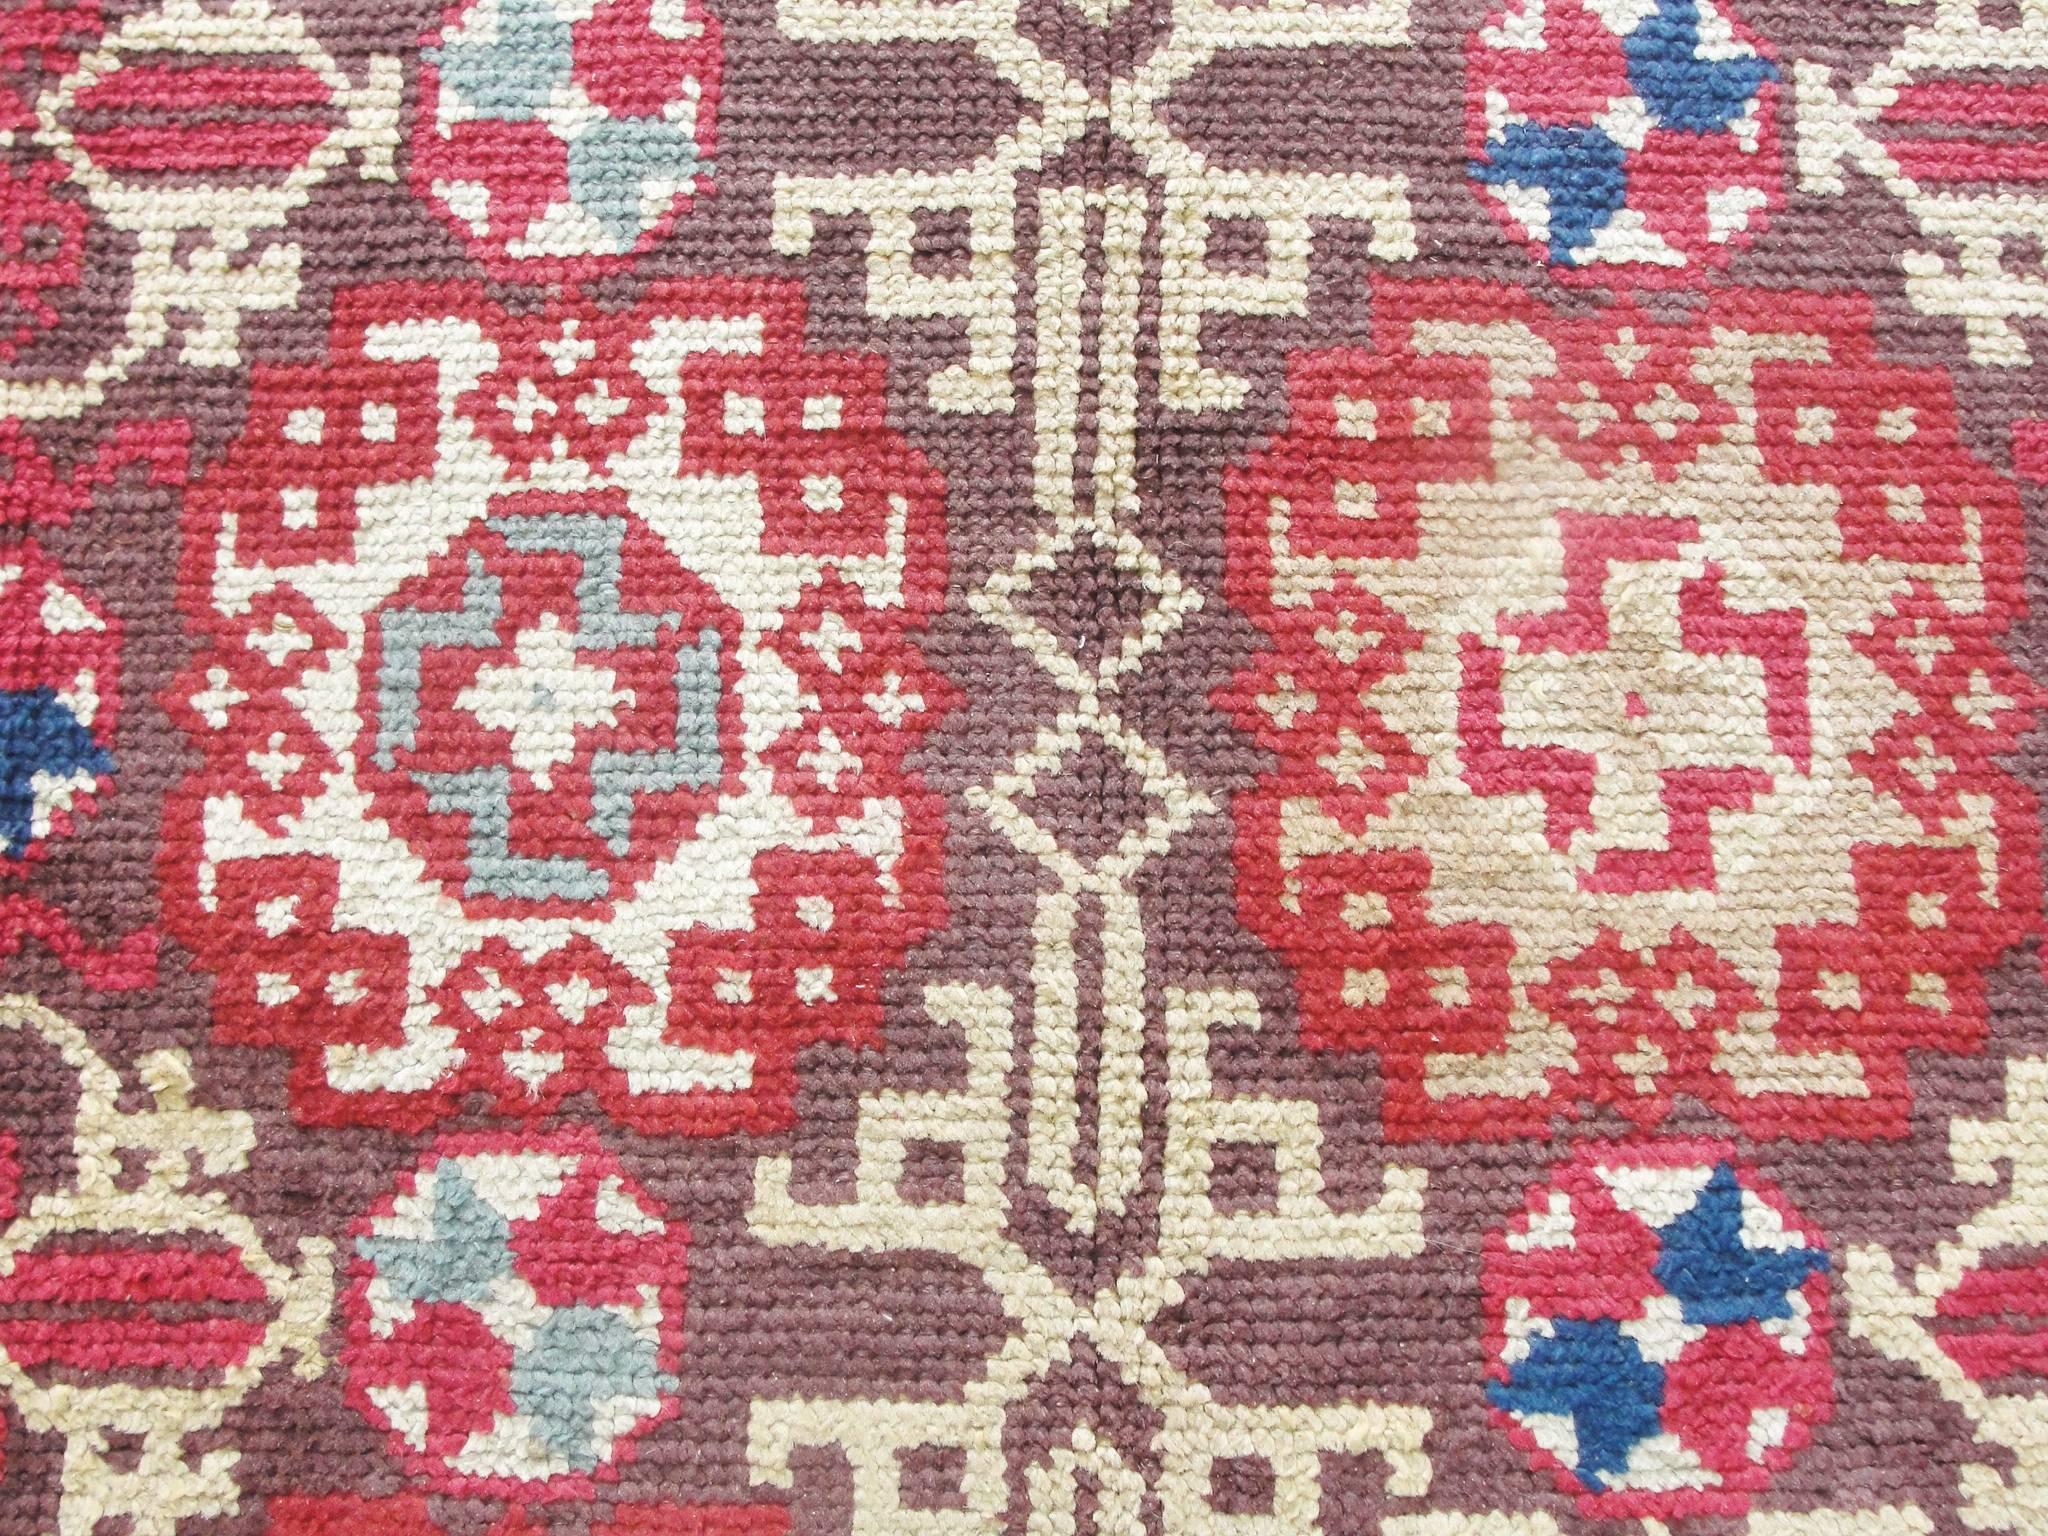 Antique Savoriness English Carpet, 8' x 11' In Excellent Condition For Sale In Evanston, IL